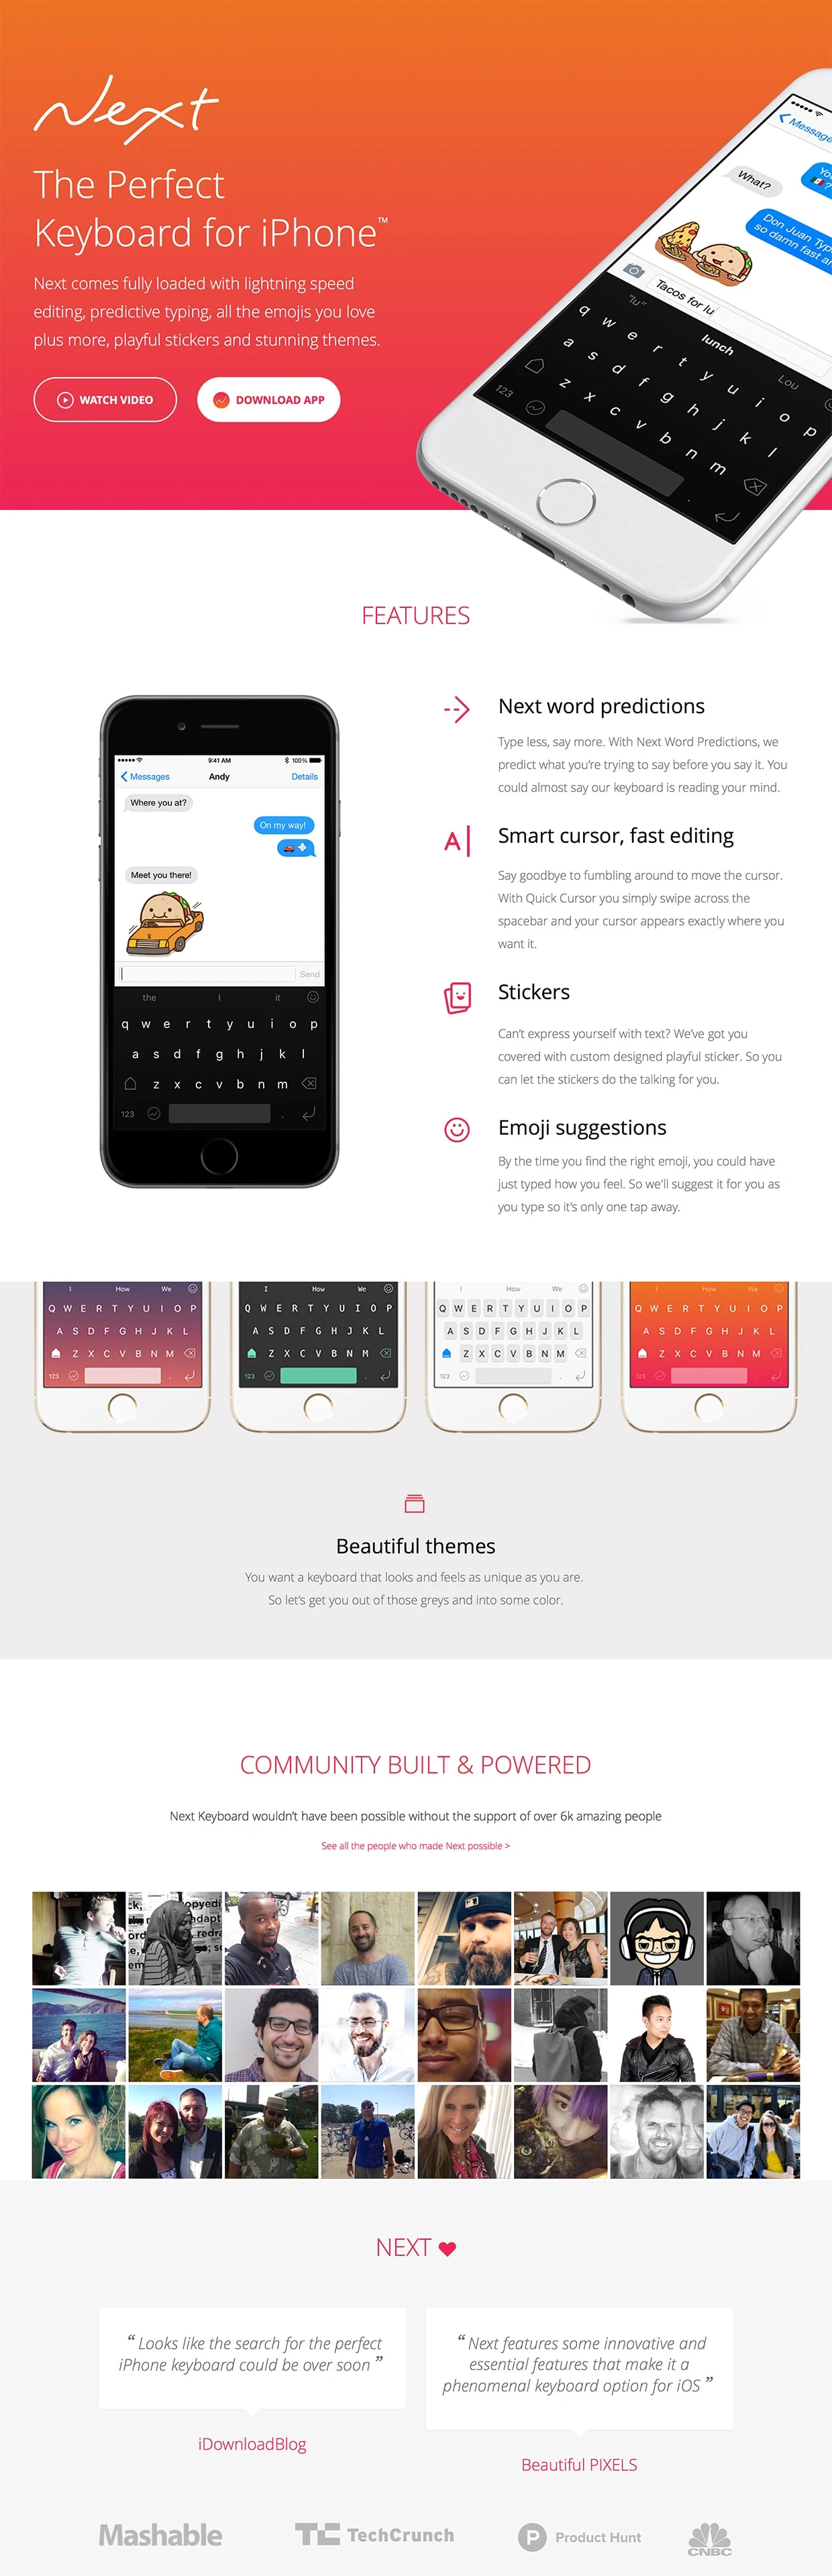 Next Landing Page Example: Next comes fully loaded with lightning speed editing, predictive typing, all the emojis you love plus more, playful stickers and stunning themes.